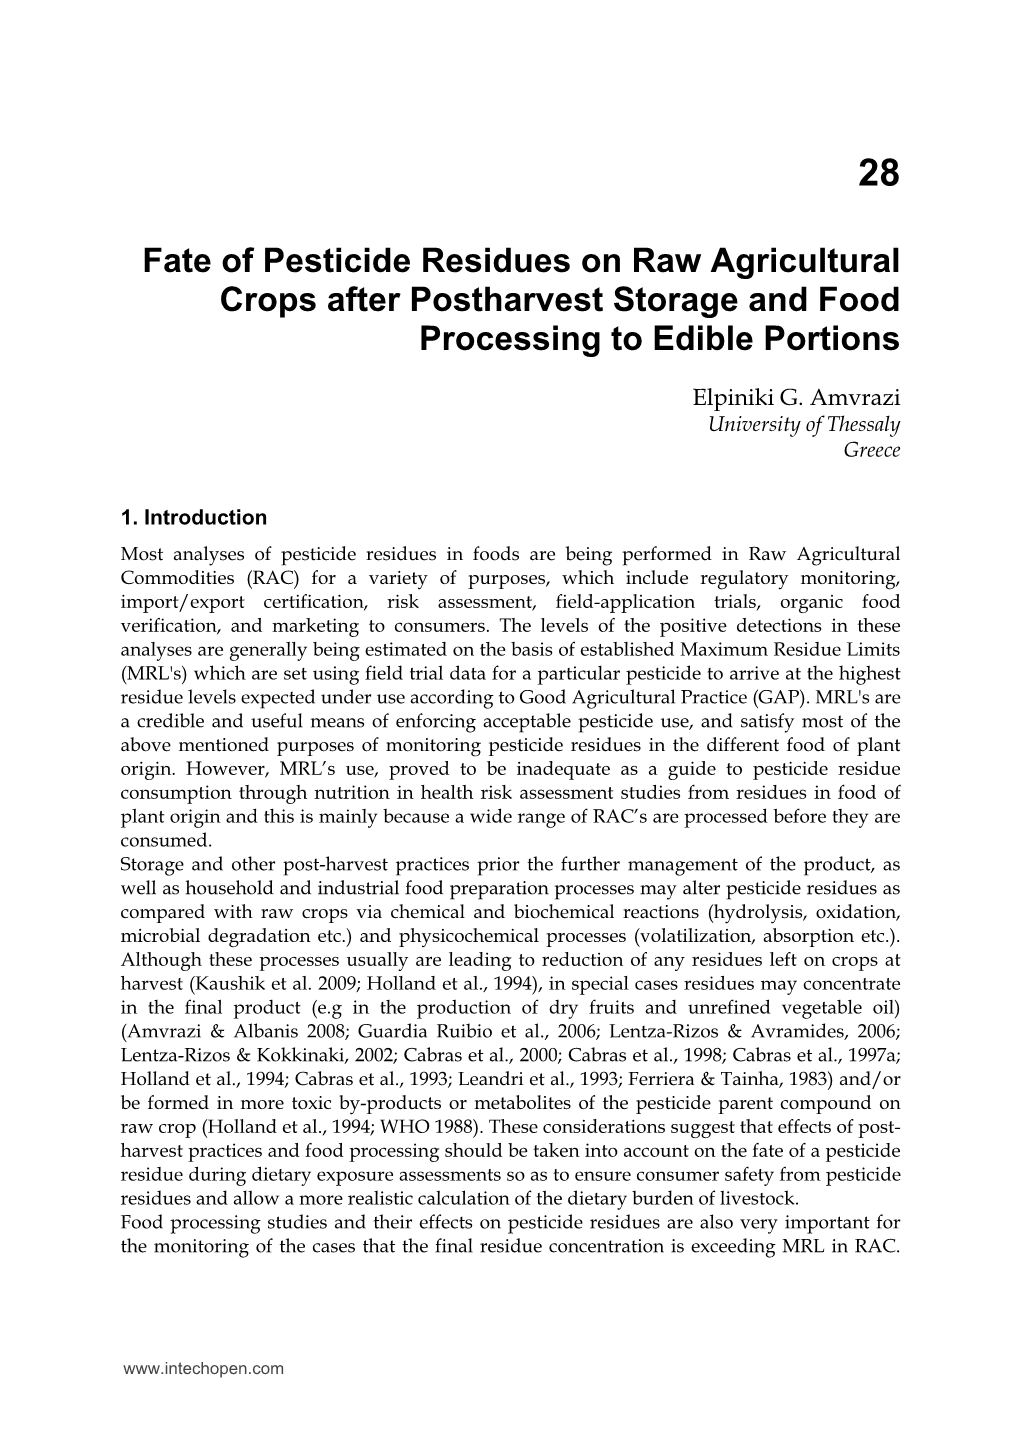 Fate of Pesticide Residues on Raw Agricultural Crops After Postharvest Storage and Food Processing to Edible Portions